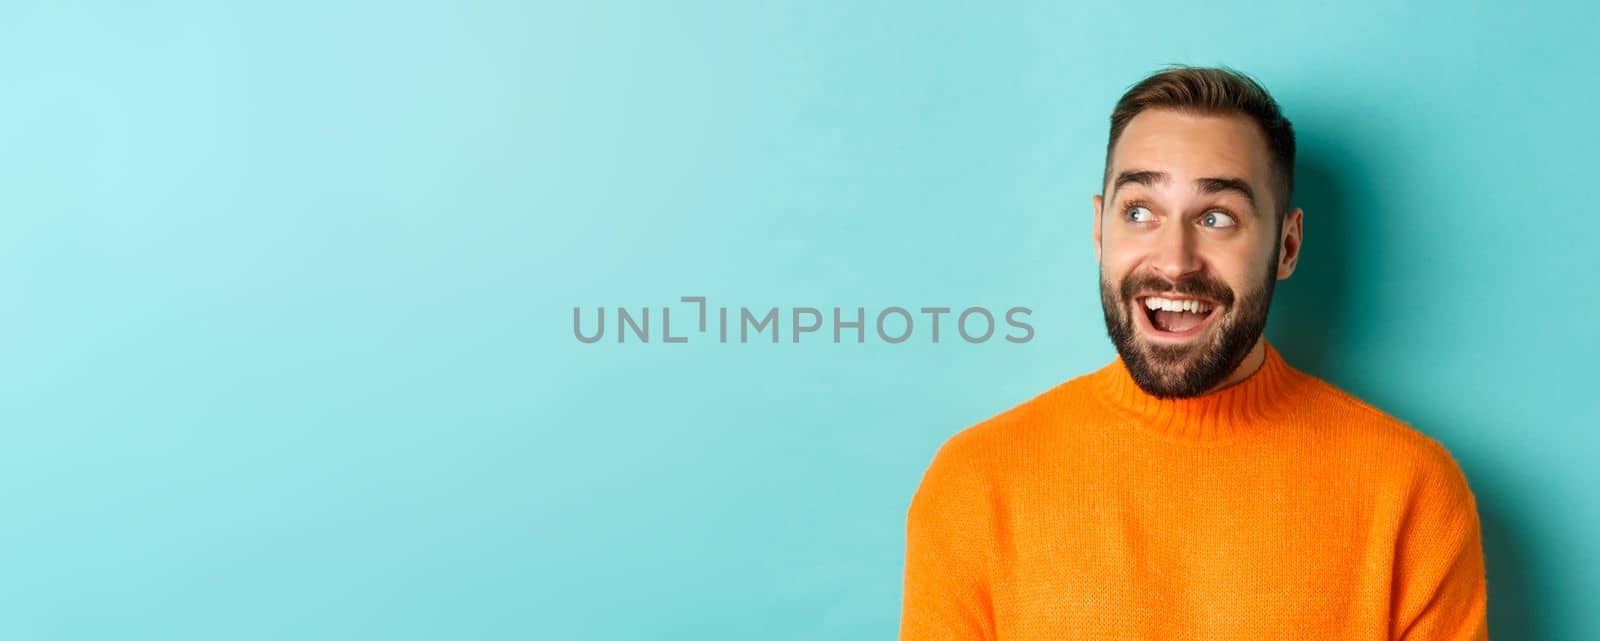 Close-up of handsome caucasian man smiling, looking left with surprised face, staring at logo, wearing orange sweater, standing against turquoise background.